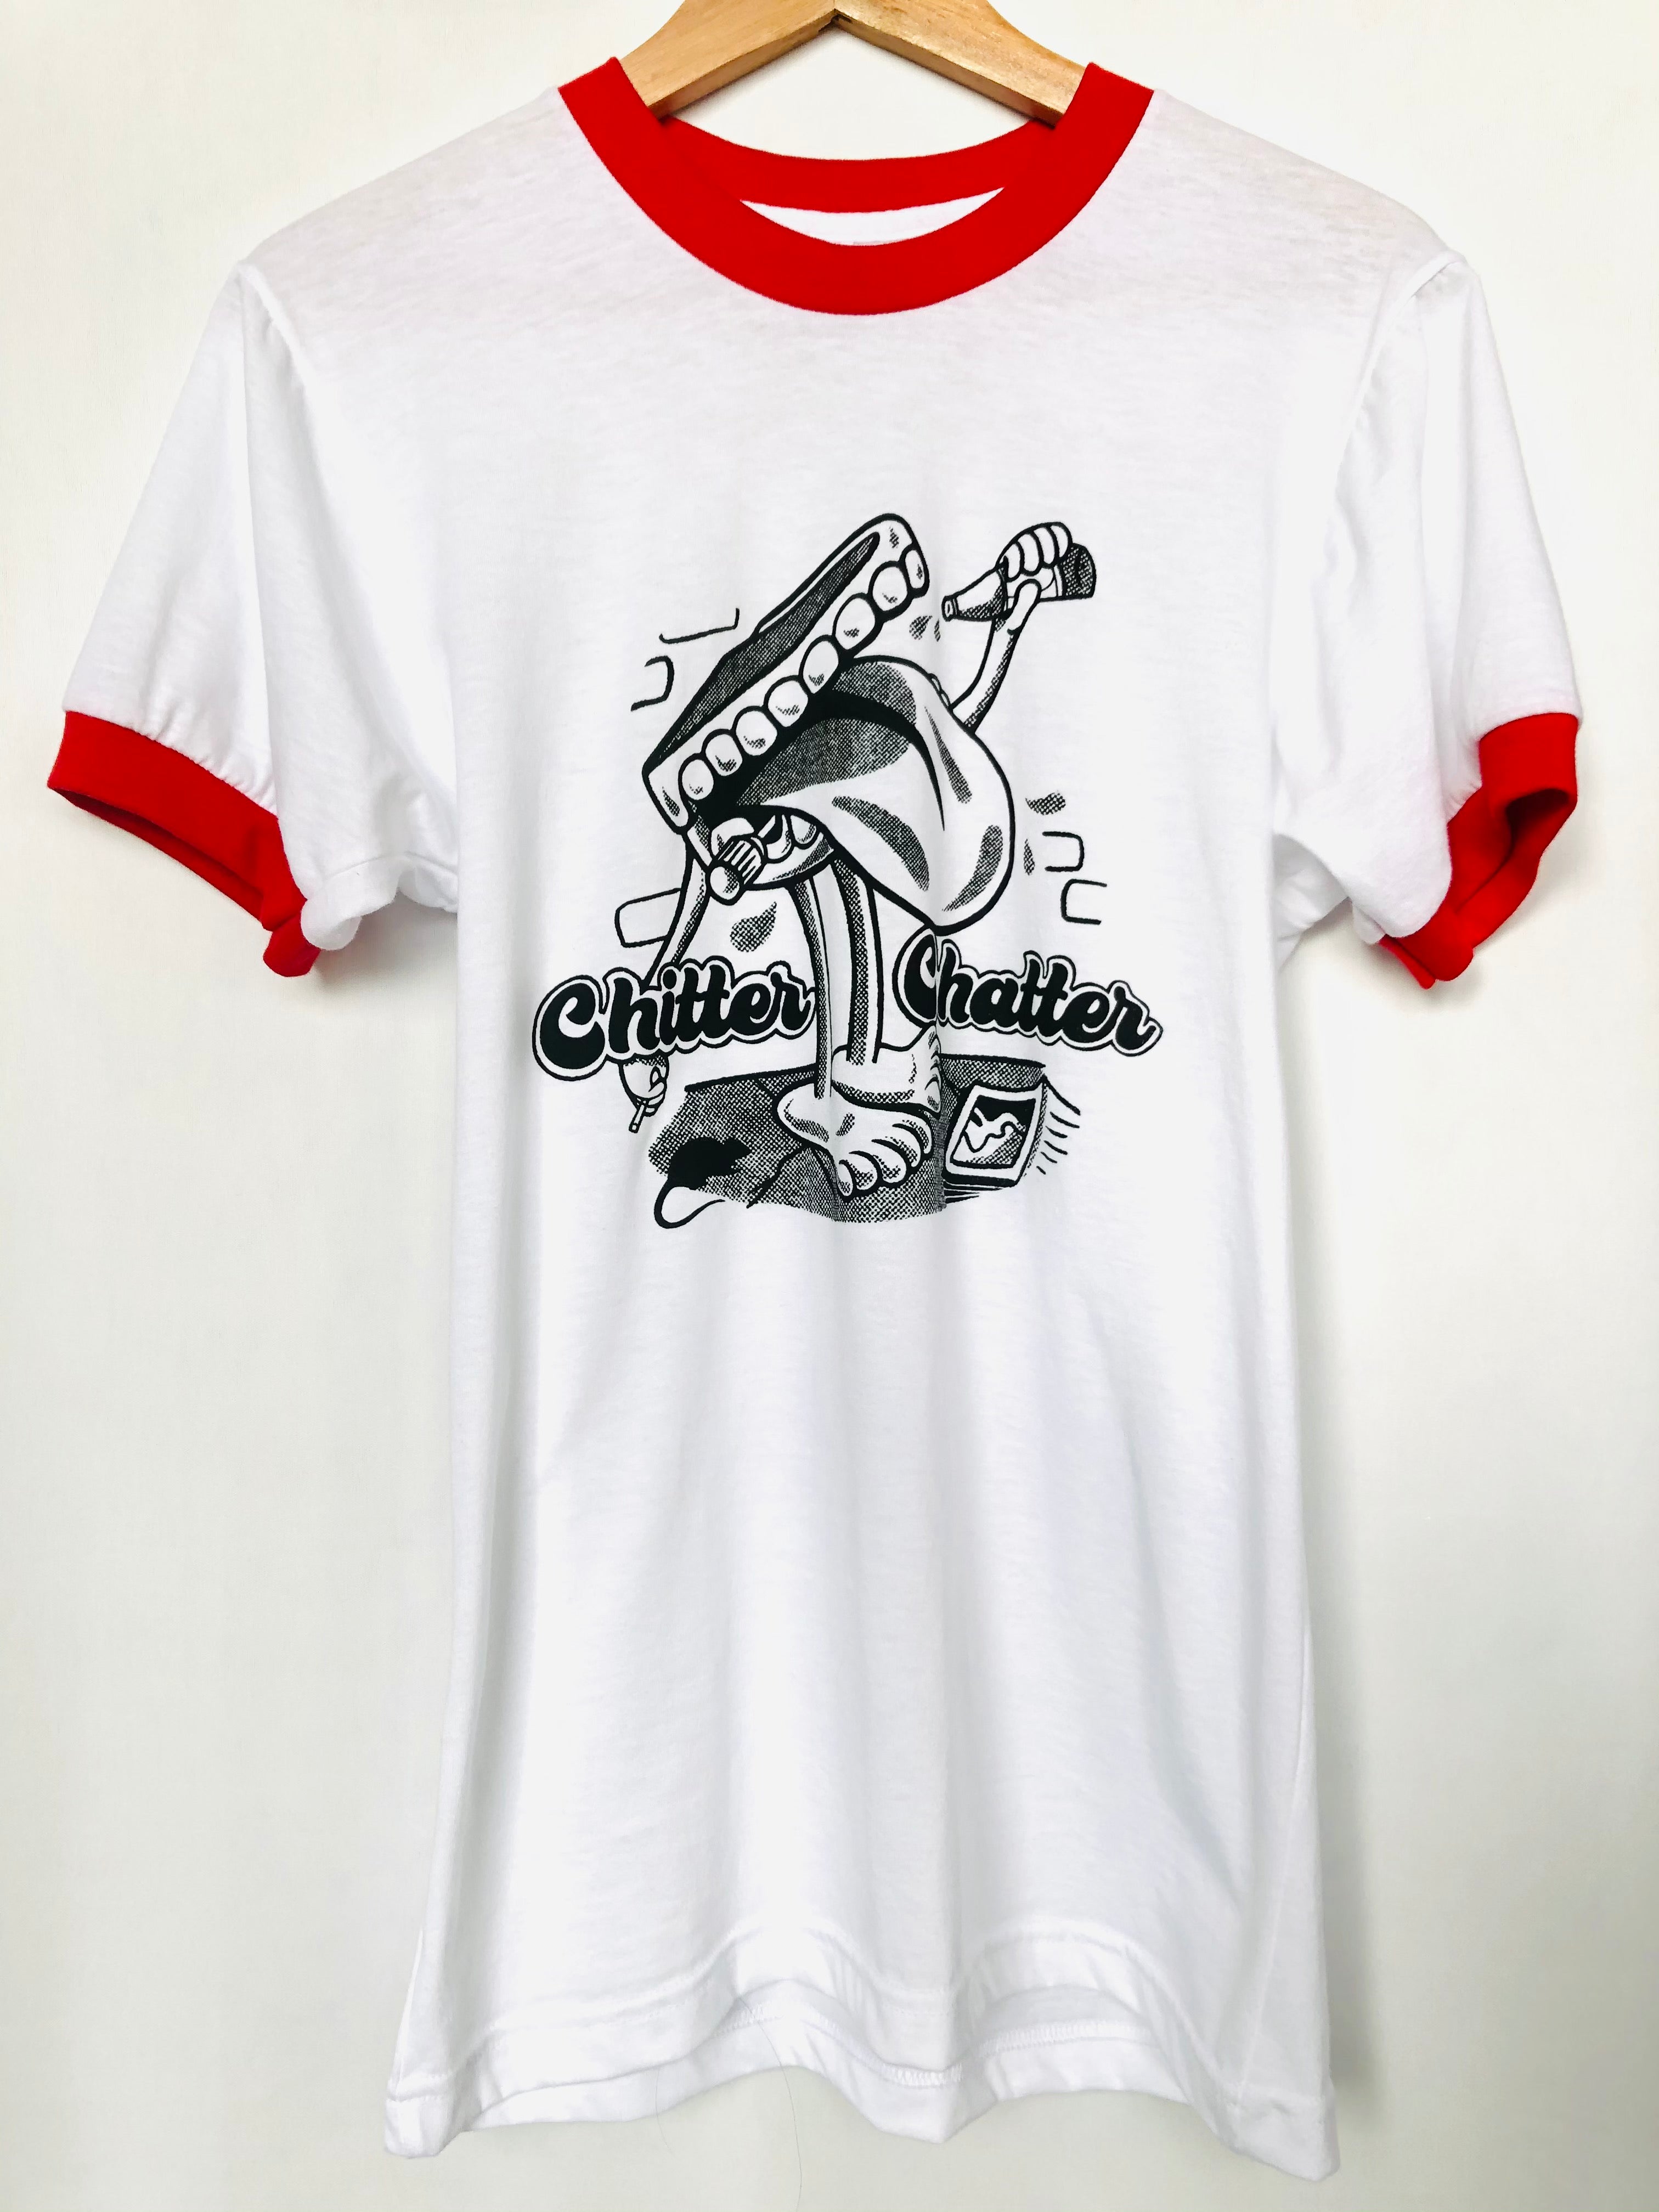 Local Oblivion “Chitter Chatter” Ringer Tee American Apparel